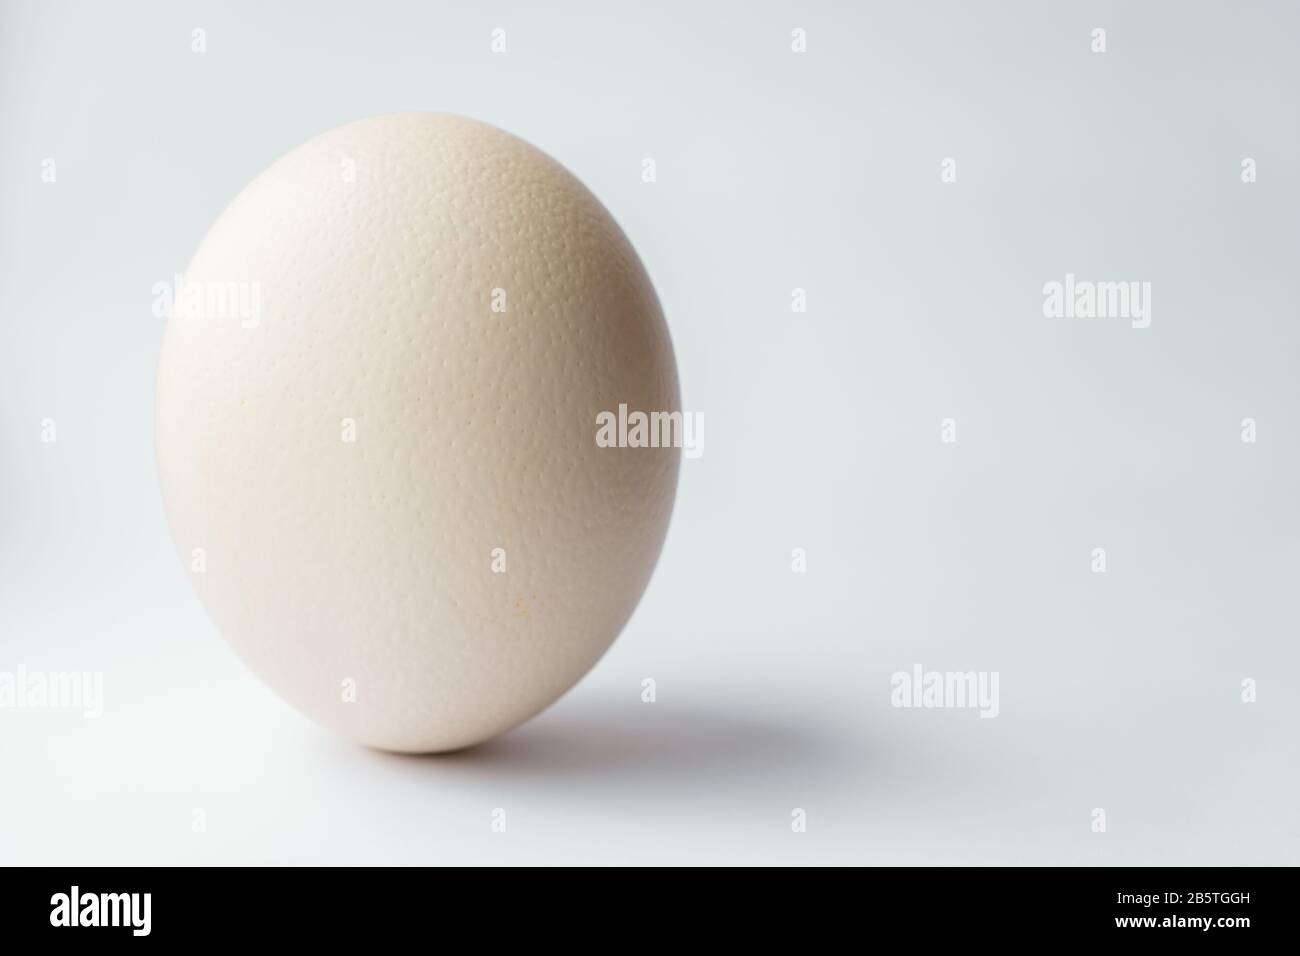 Ostrich egg on a white background. Large ostrich egg in an upright position on a white background. Stock Photo